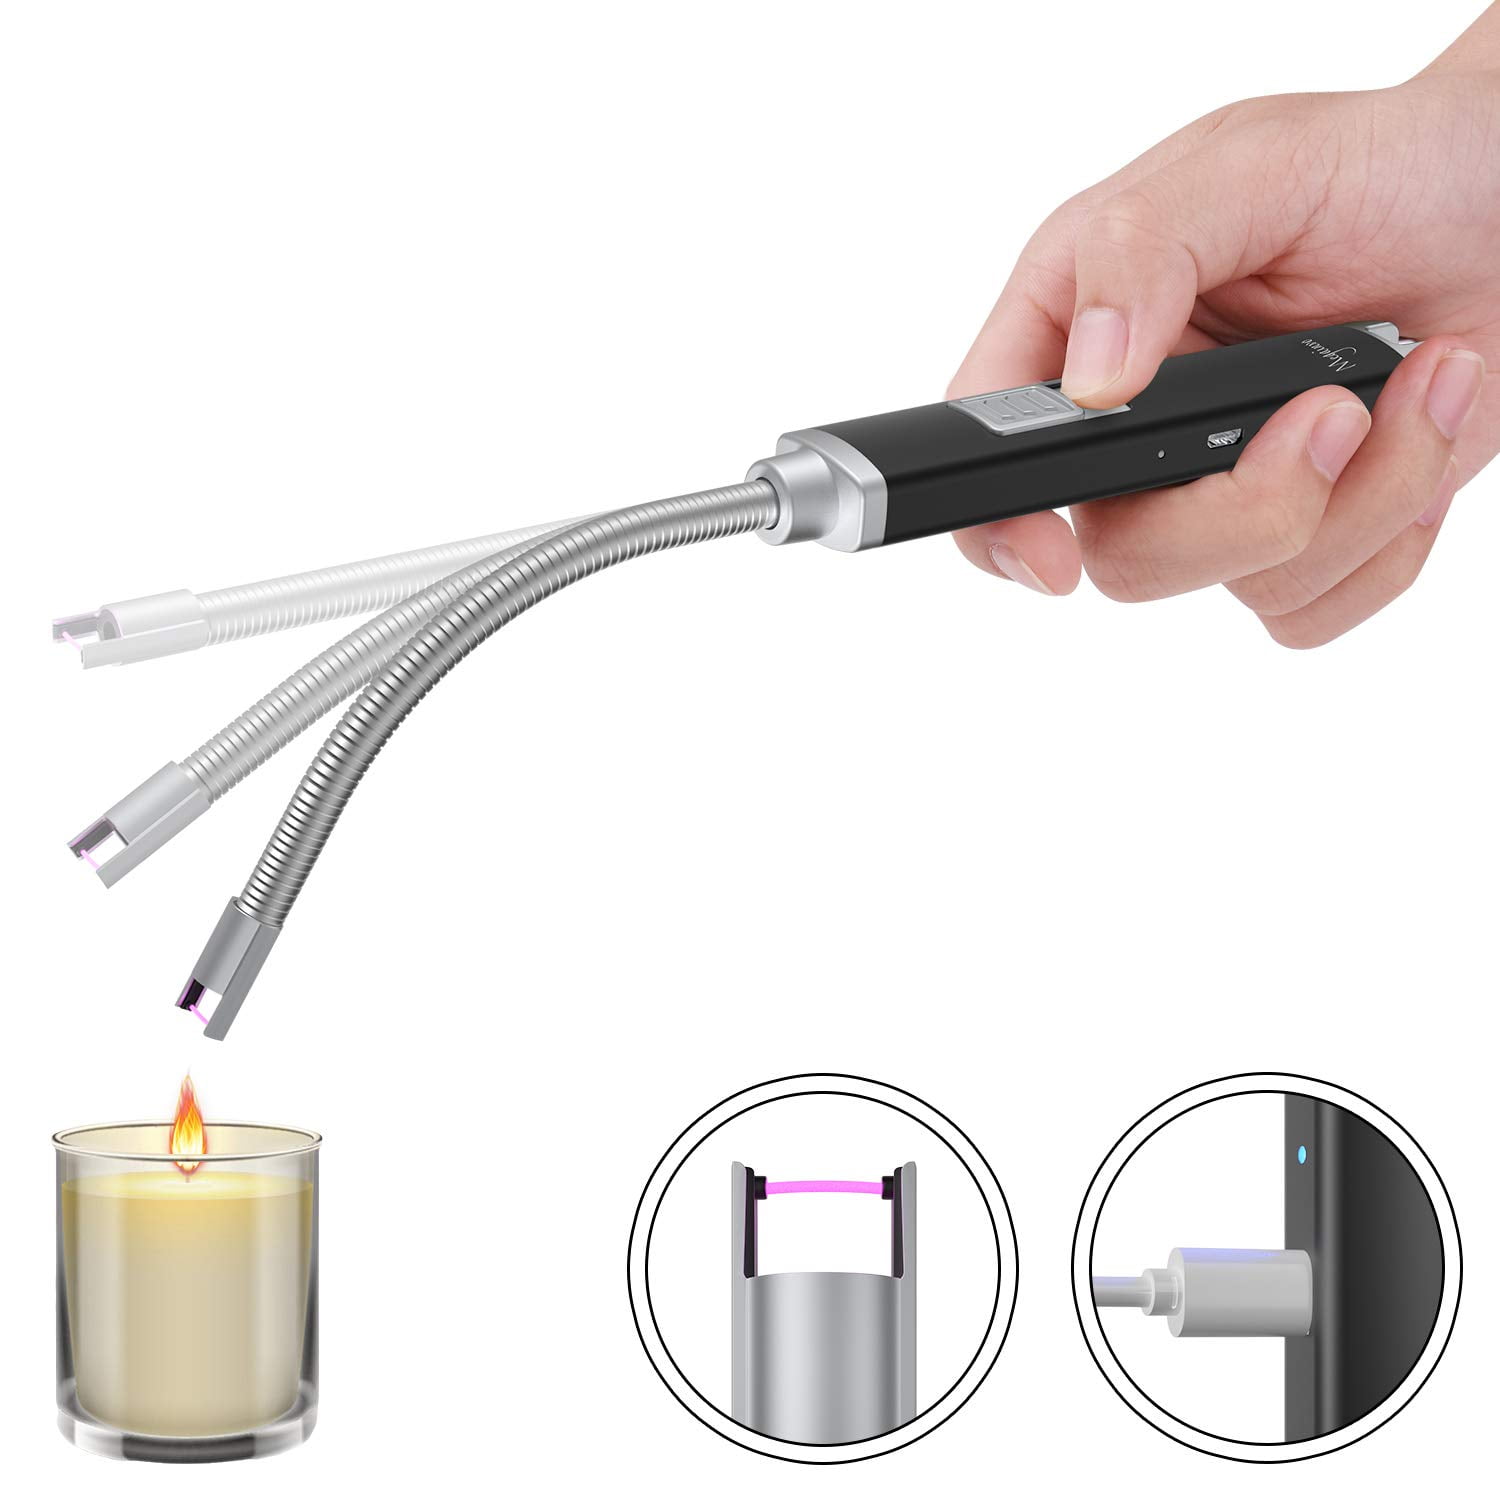 Silver Candle Lighter,Electronic Lighters Long Reach USB Rechargeable,Plasma Arc Flameless Lighter with LED Battery Display for Kitchen,Barbecue,Candles,Camping,Cooking,BBQs,Fireworks